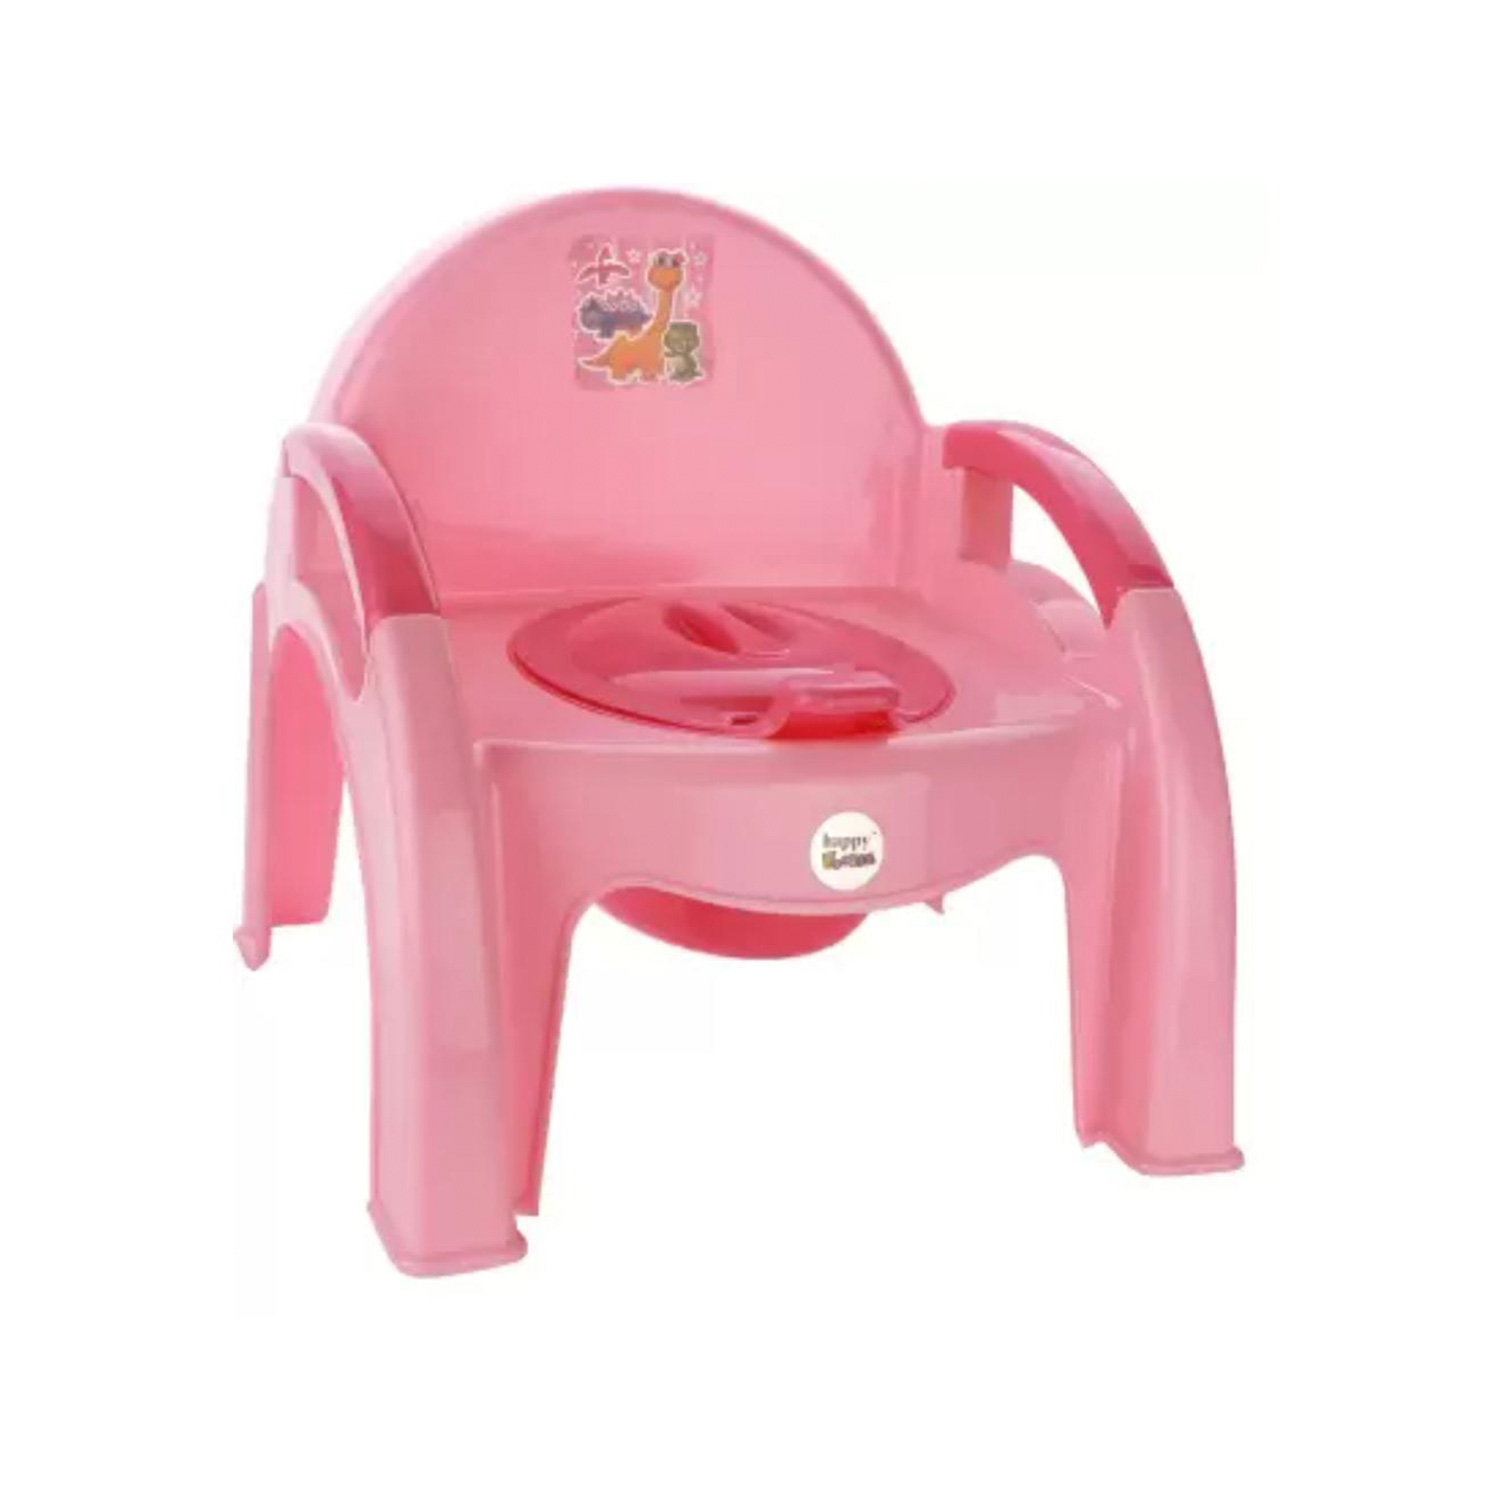 Baby_poty_Pink_chair-4